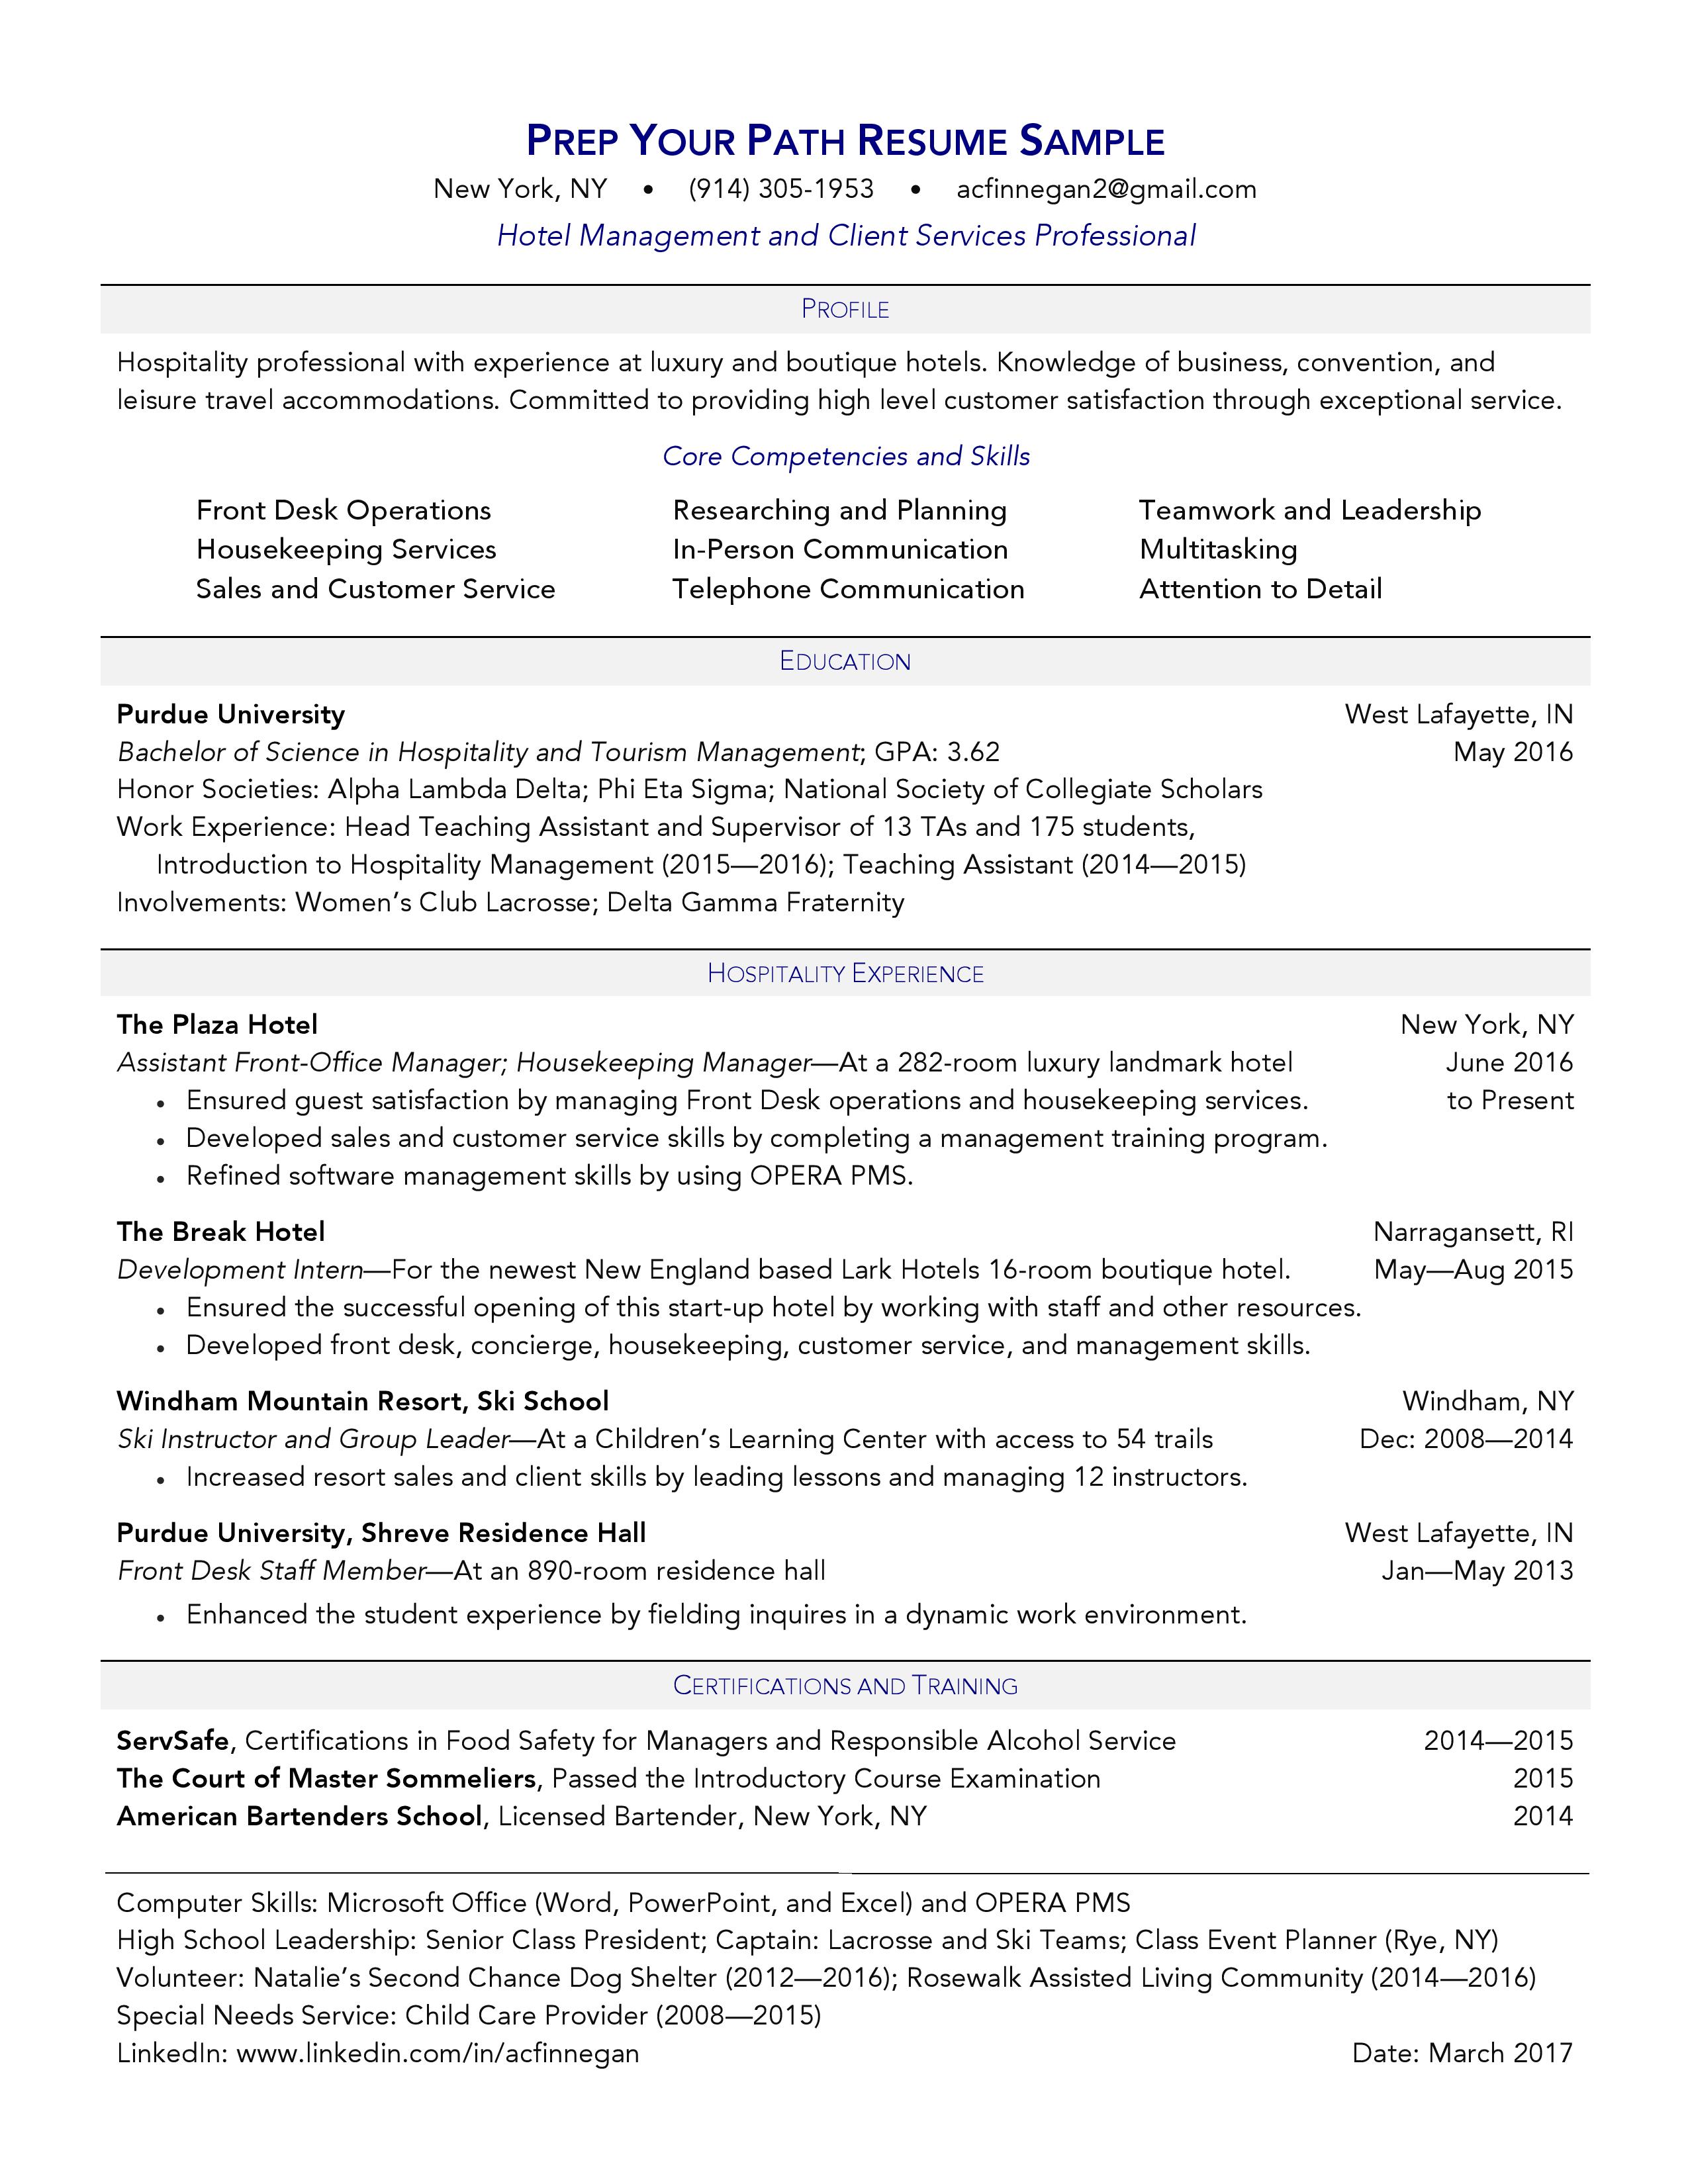 Young Professional Resume - After